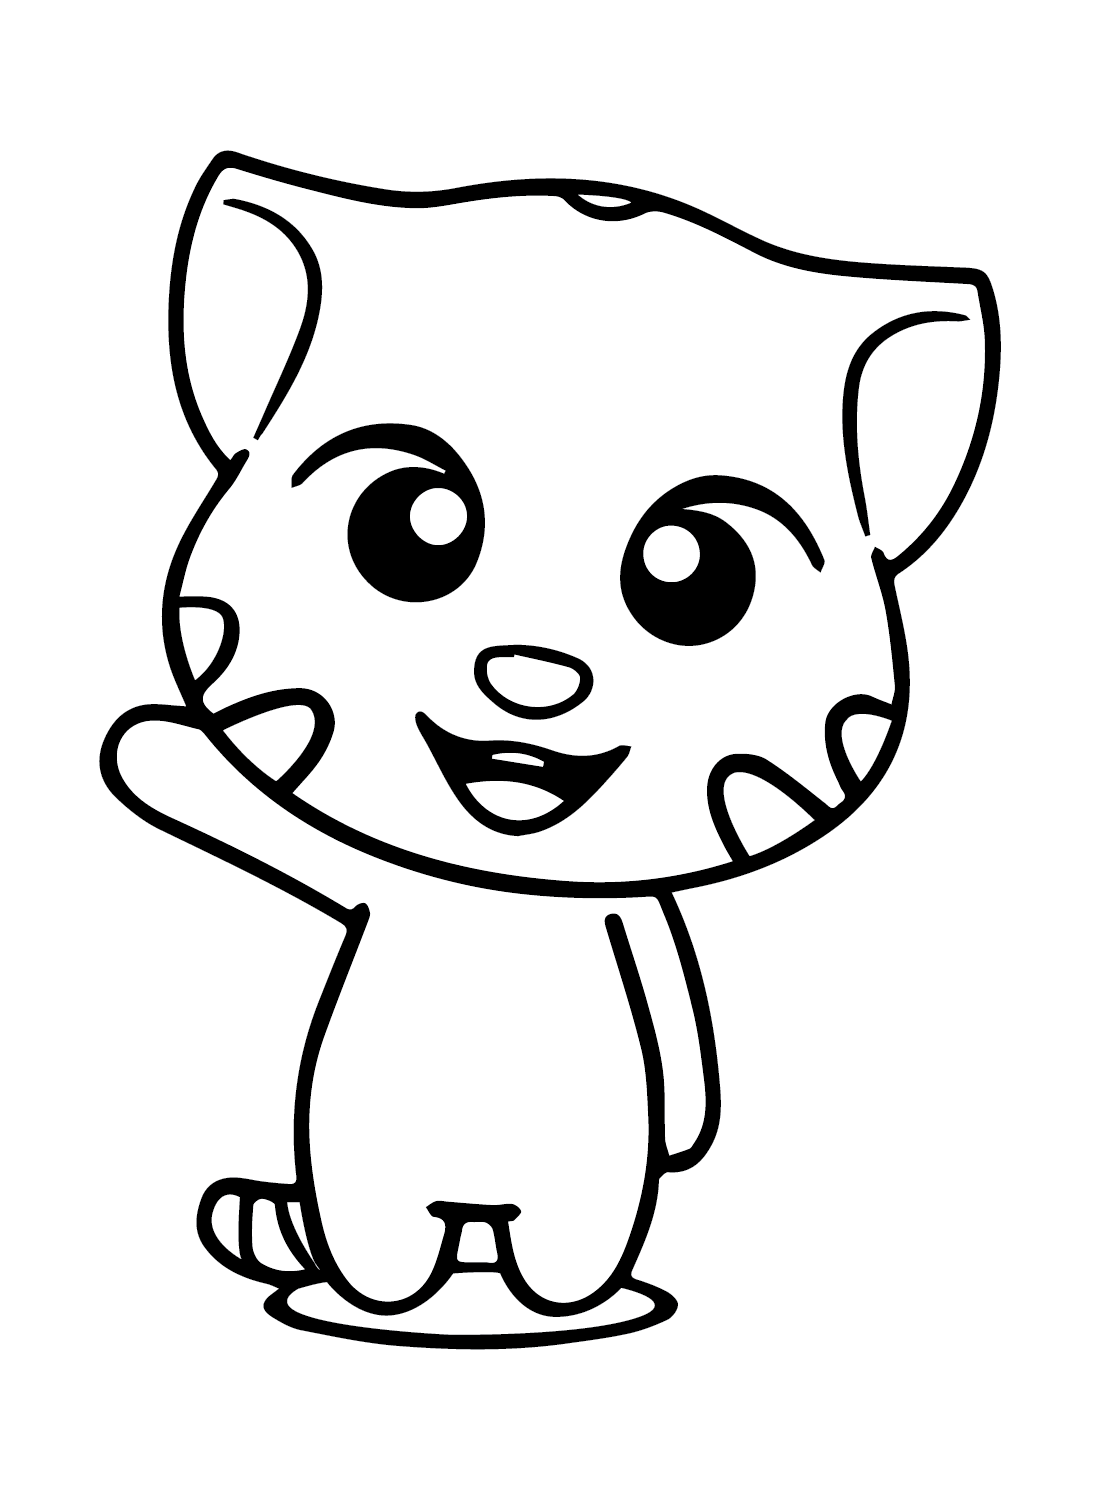 Printable Baby Talking Tom and Friends Coloring Page for kids.